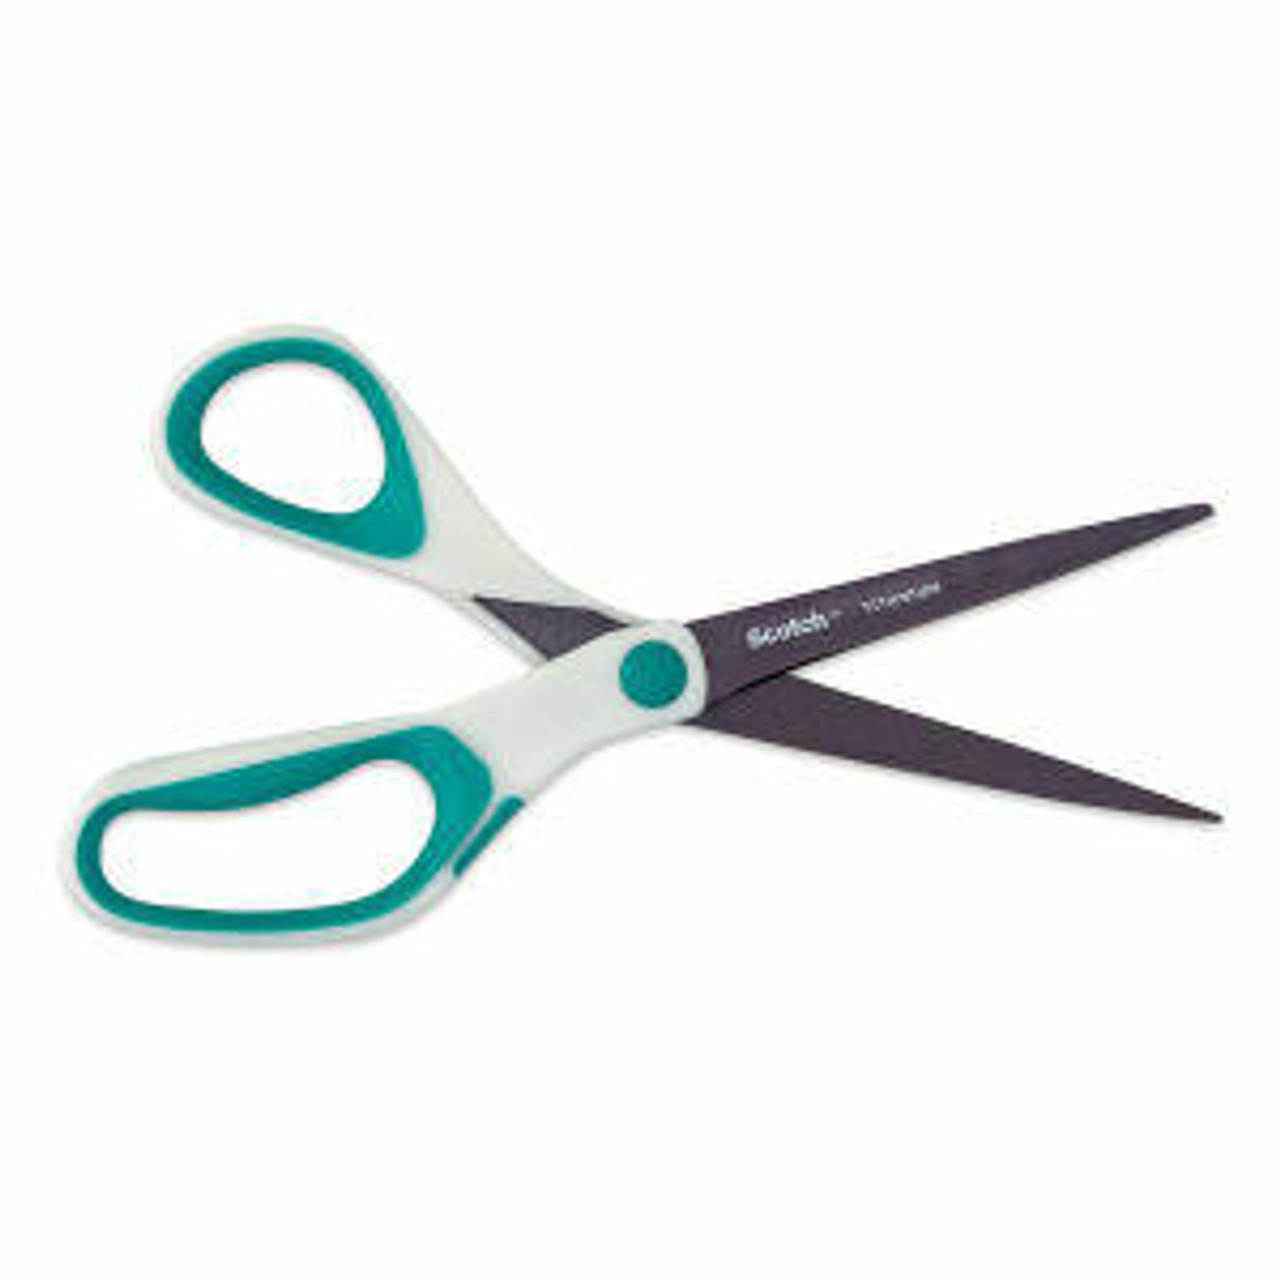 https://cdn11.bigcommerce.com/s-9uf88xhege/images/stencil/1280x1280/products/7642/49810/3m-co-3m-precision-ultra-edge-scissors-8-precision-ultra-edge-scissors__44680.1655108689.jpg?c=1?imbypass=on